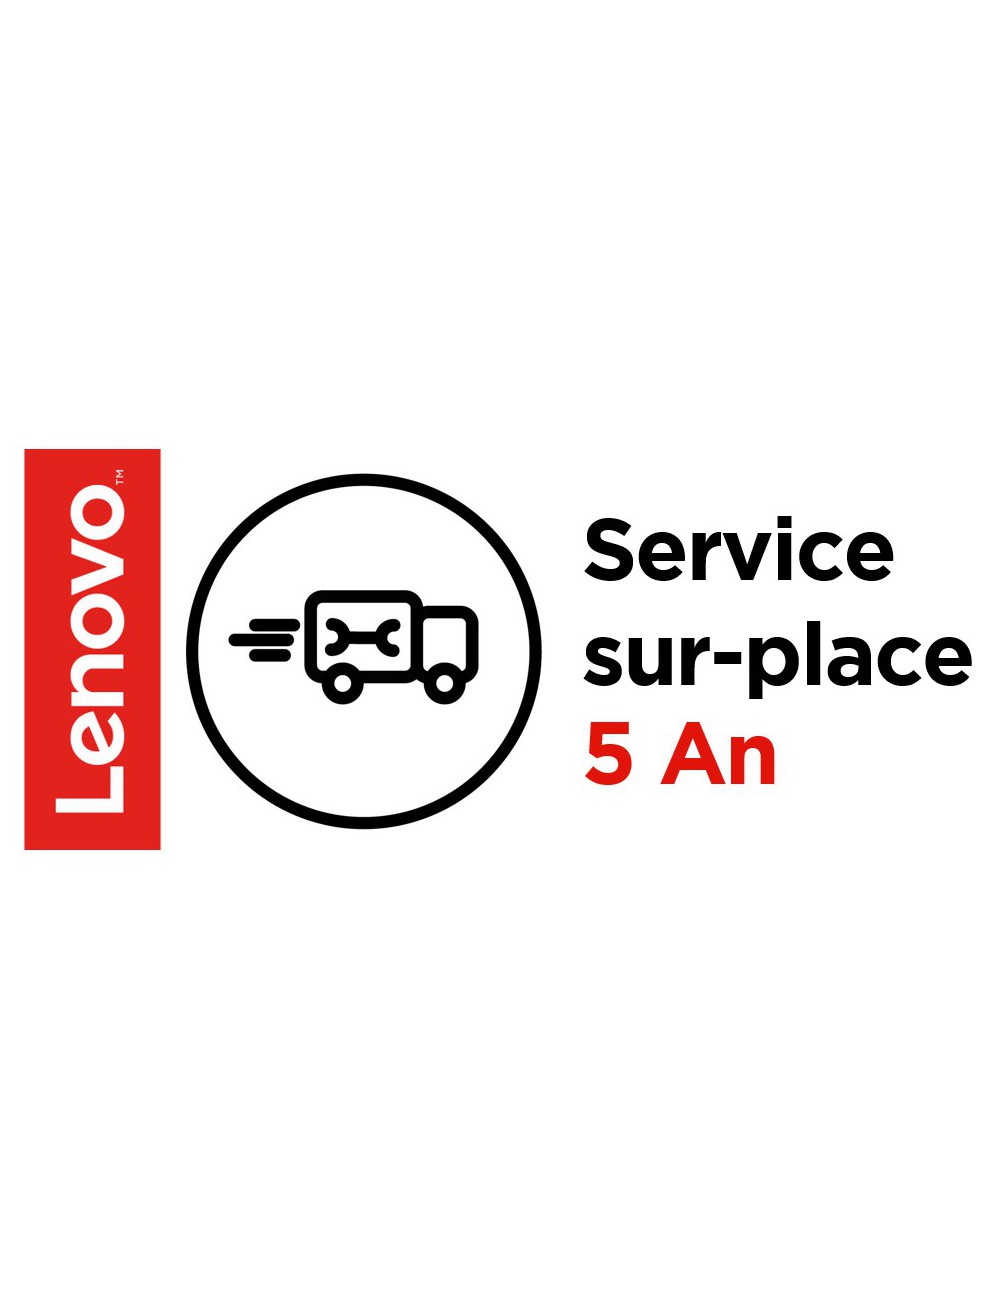 Lenovo 5 Year Onsite Support (Add-On) 5 année(s)